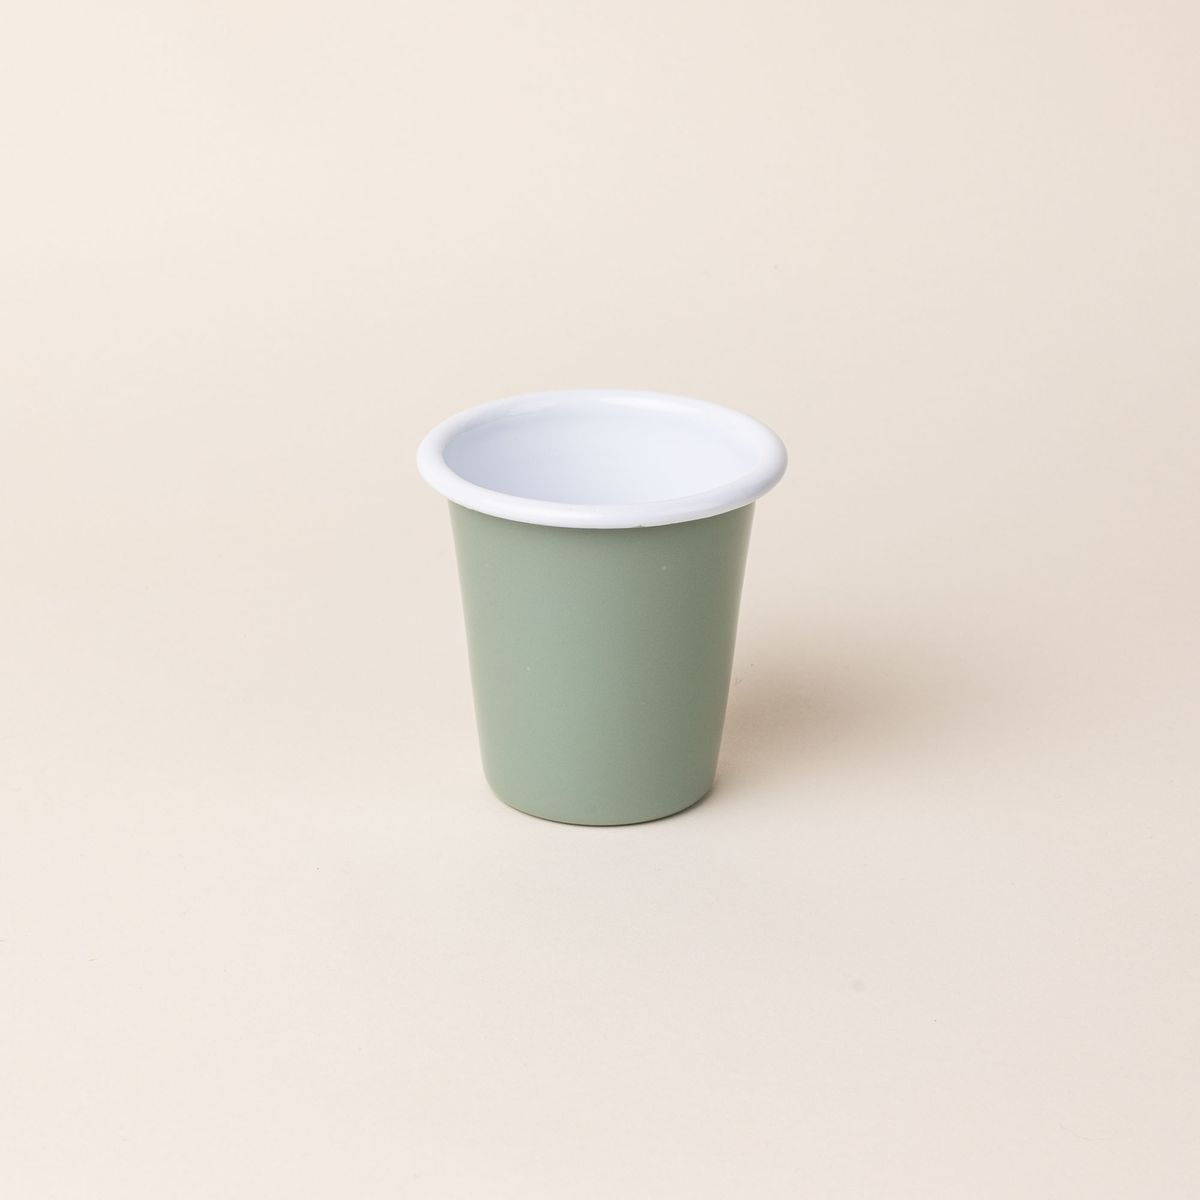 A short enamel cup with a sage green exterior and white interior